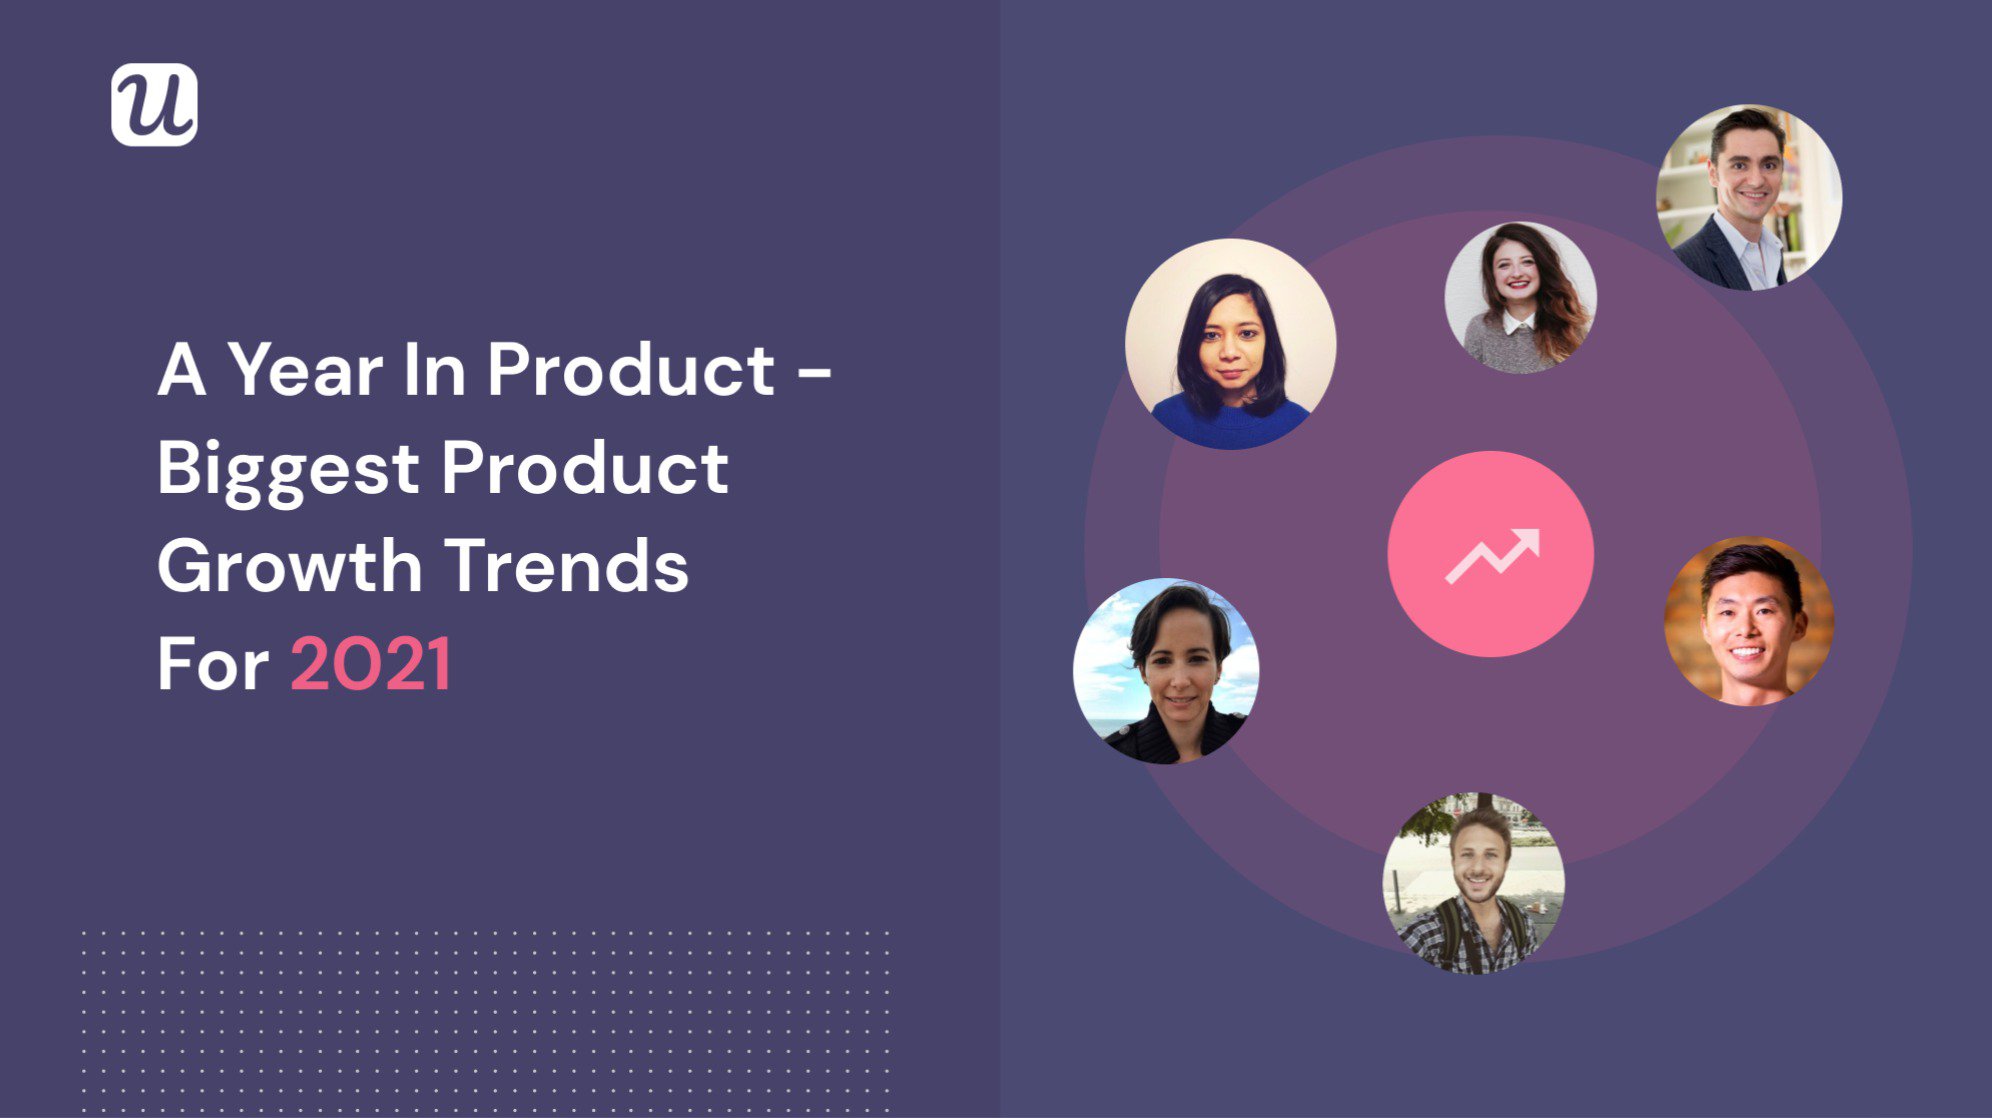 Year in Product - The Greatest Product Growth & Adoption Trends for 2021